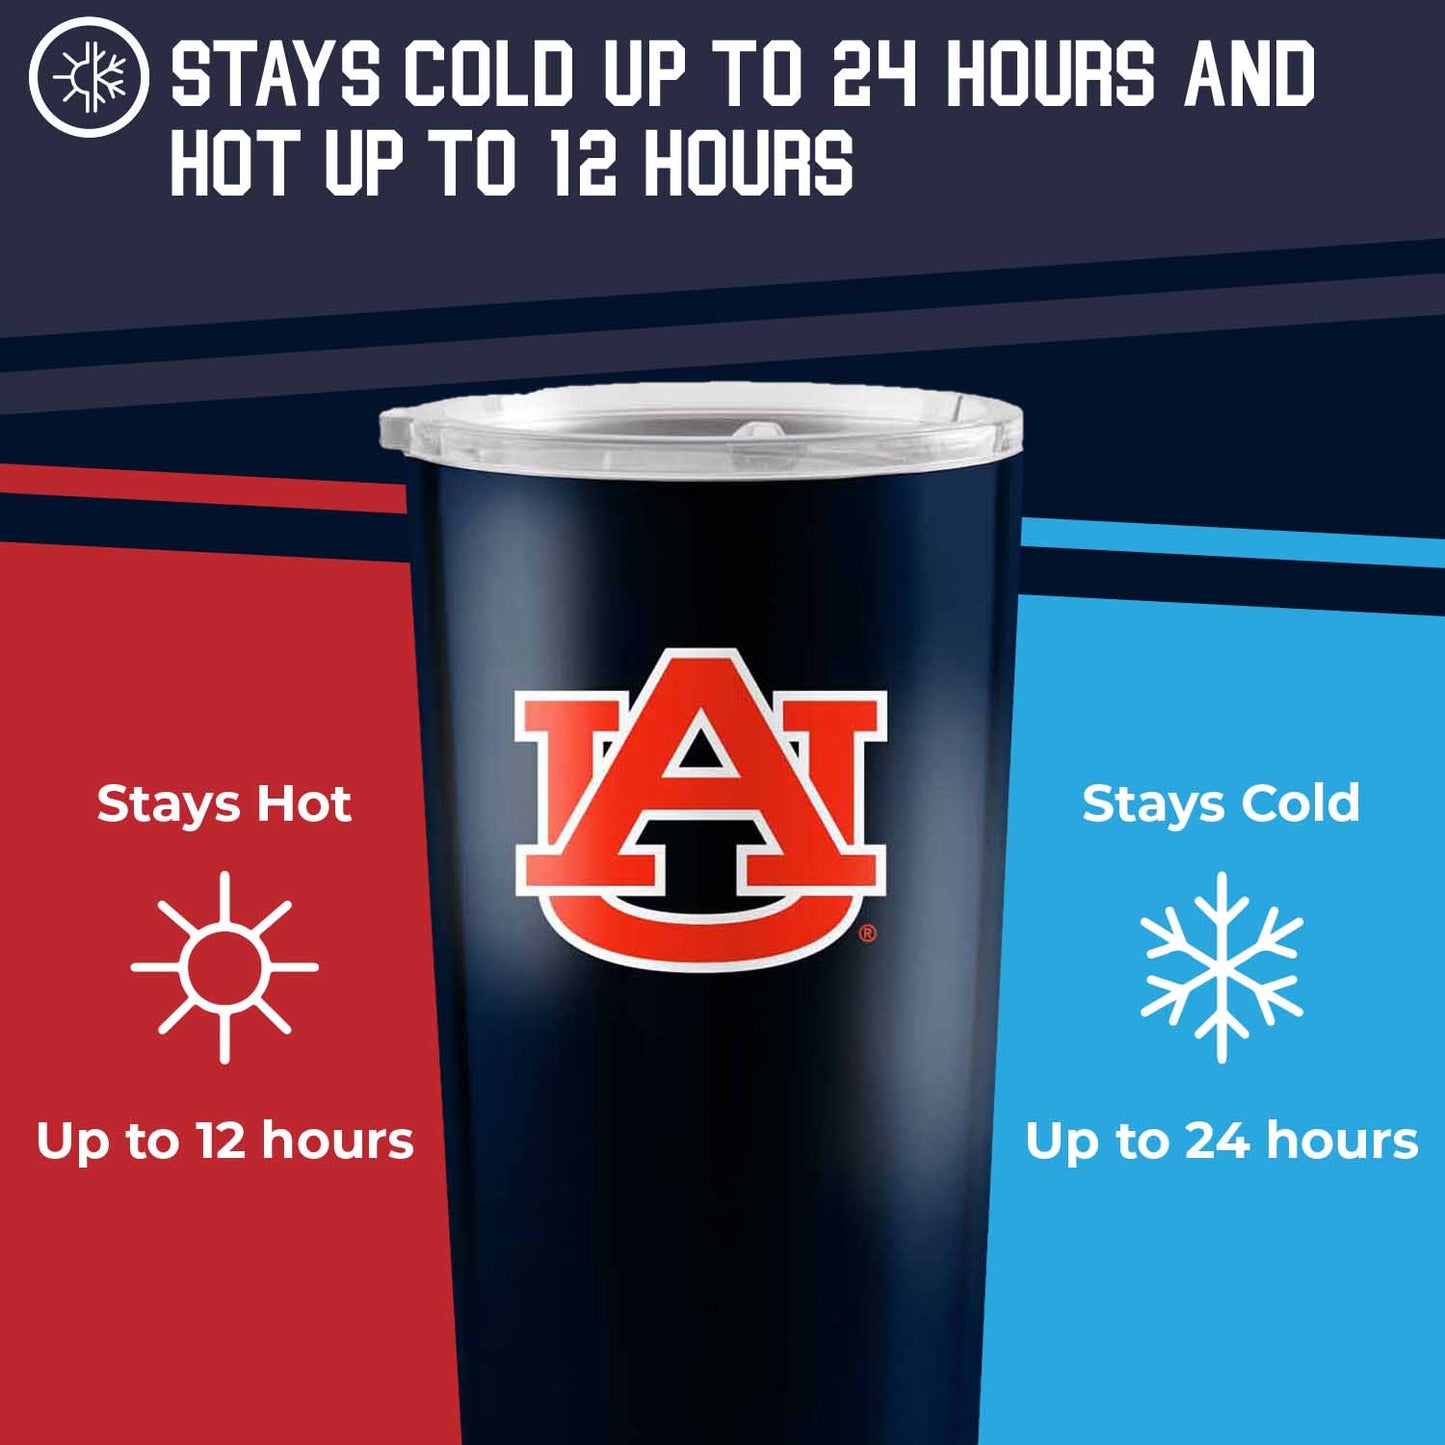 Auburn Tigers 20 oz Overtime Insulated Stainless Steel Coffee and Travel Tumbler - Navy